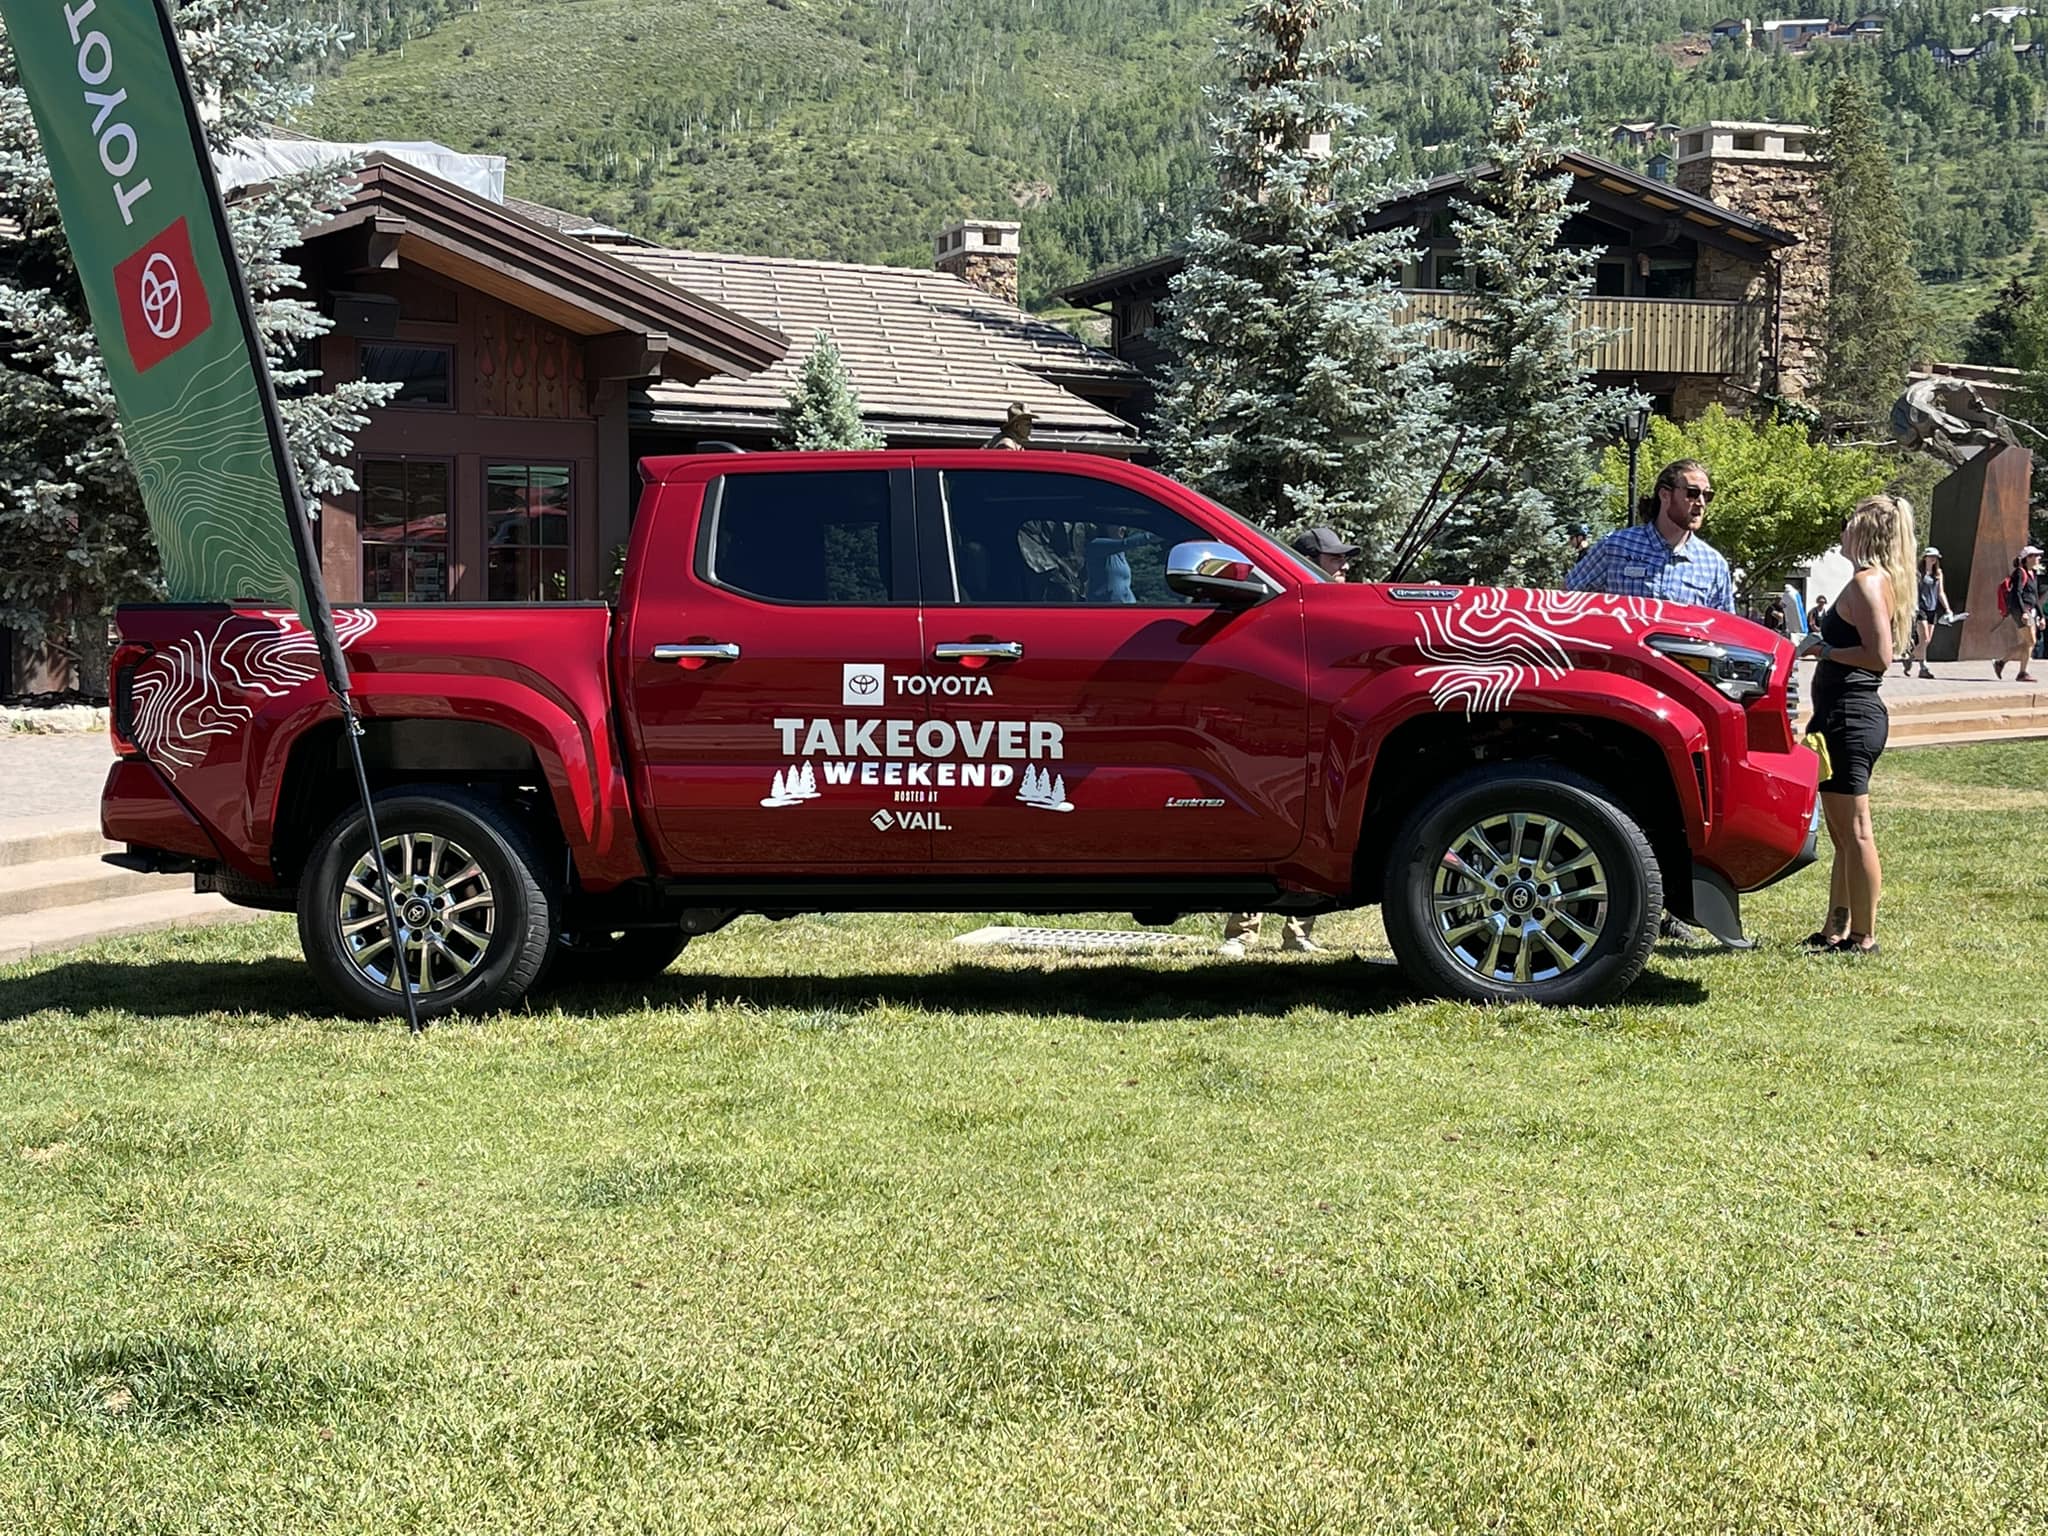 2024 Tacoma 2024 Tacoma Limited in Supersonic Red appears at Toyota Takeover Weekend Vail 2024 Tacoma Limited in Supersonic Red 10